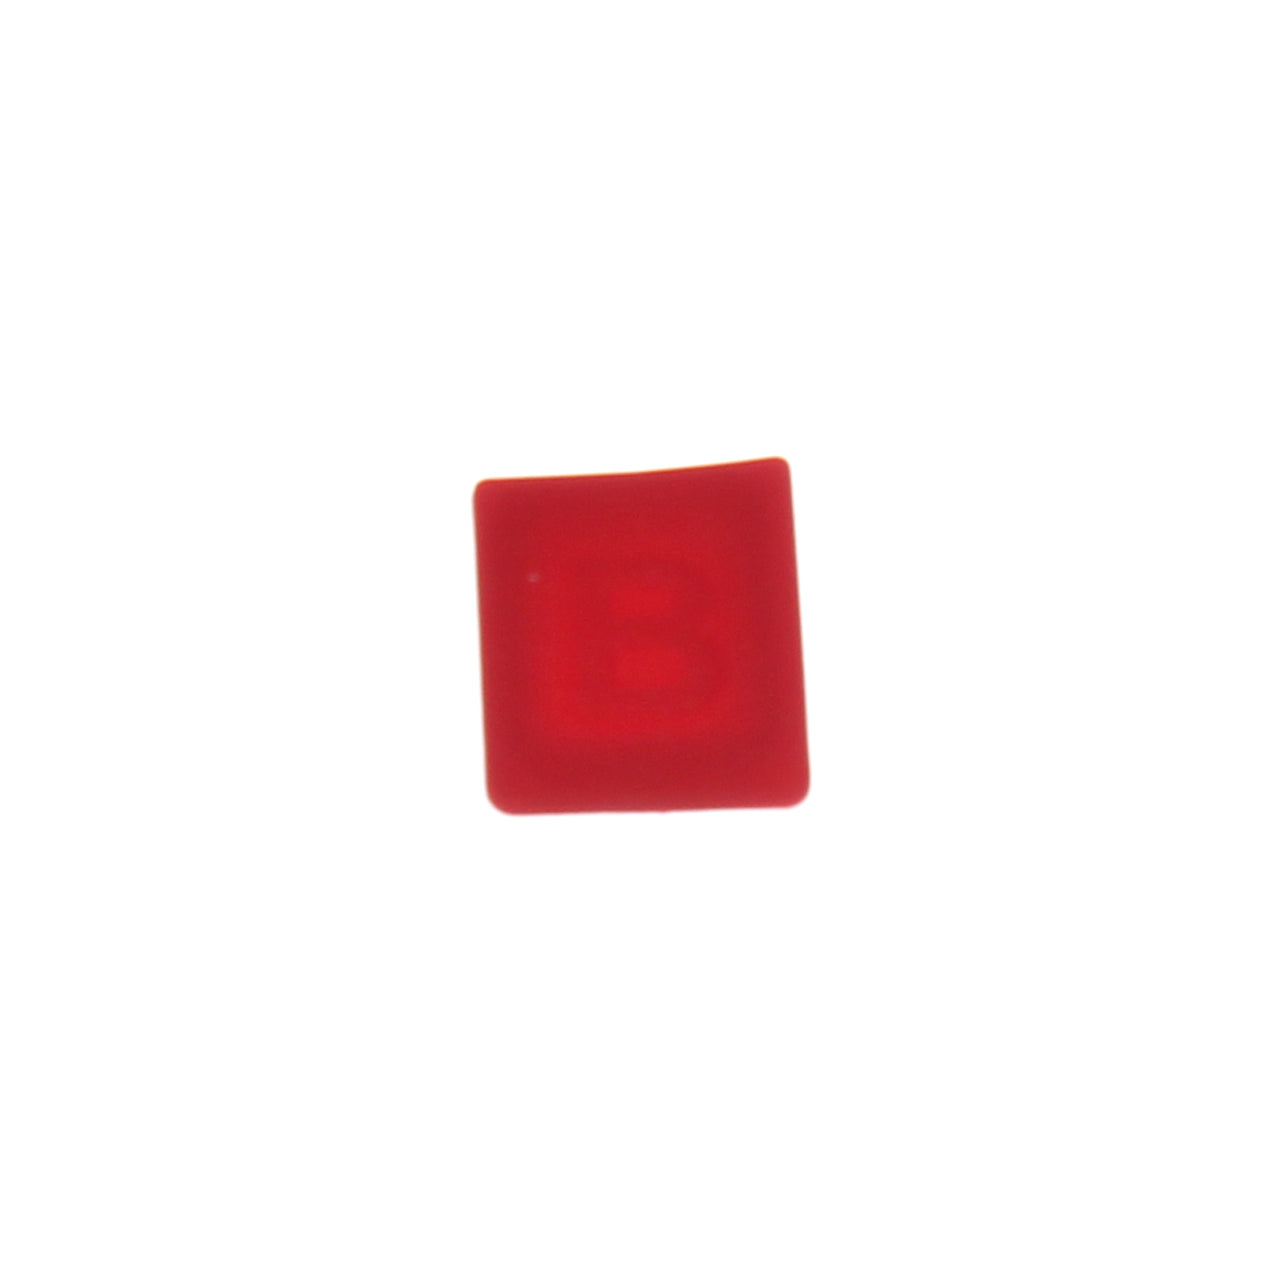 Red Humidity Port Plug for the Nurture Right 360